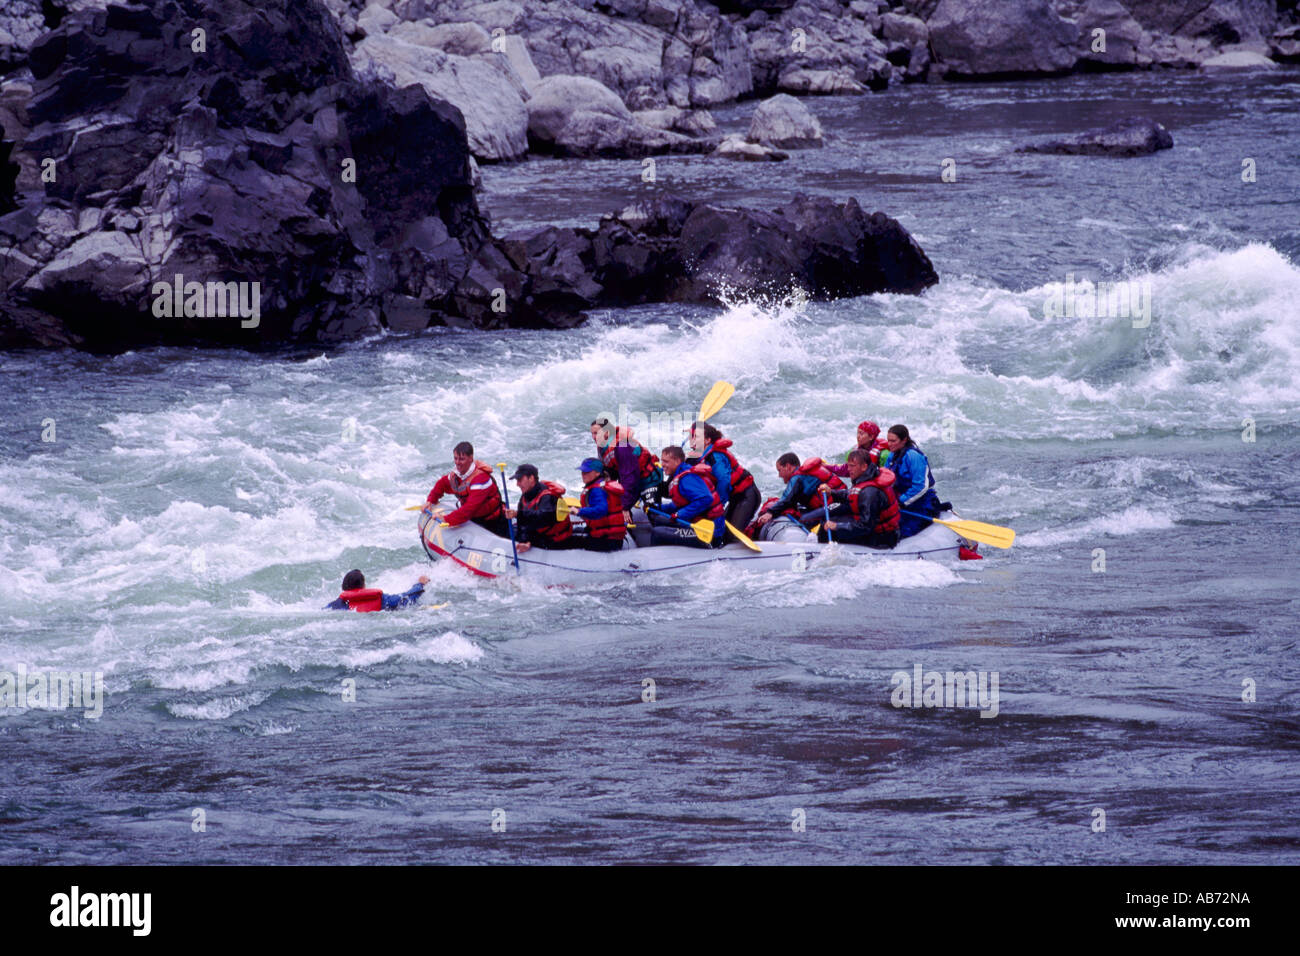 Thompson River near Lytton, BC, British Columbia, Canada - Man overboard in White Water / Whitewater Rafting Accident Stock Photo